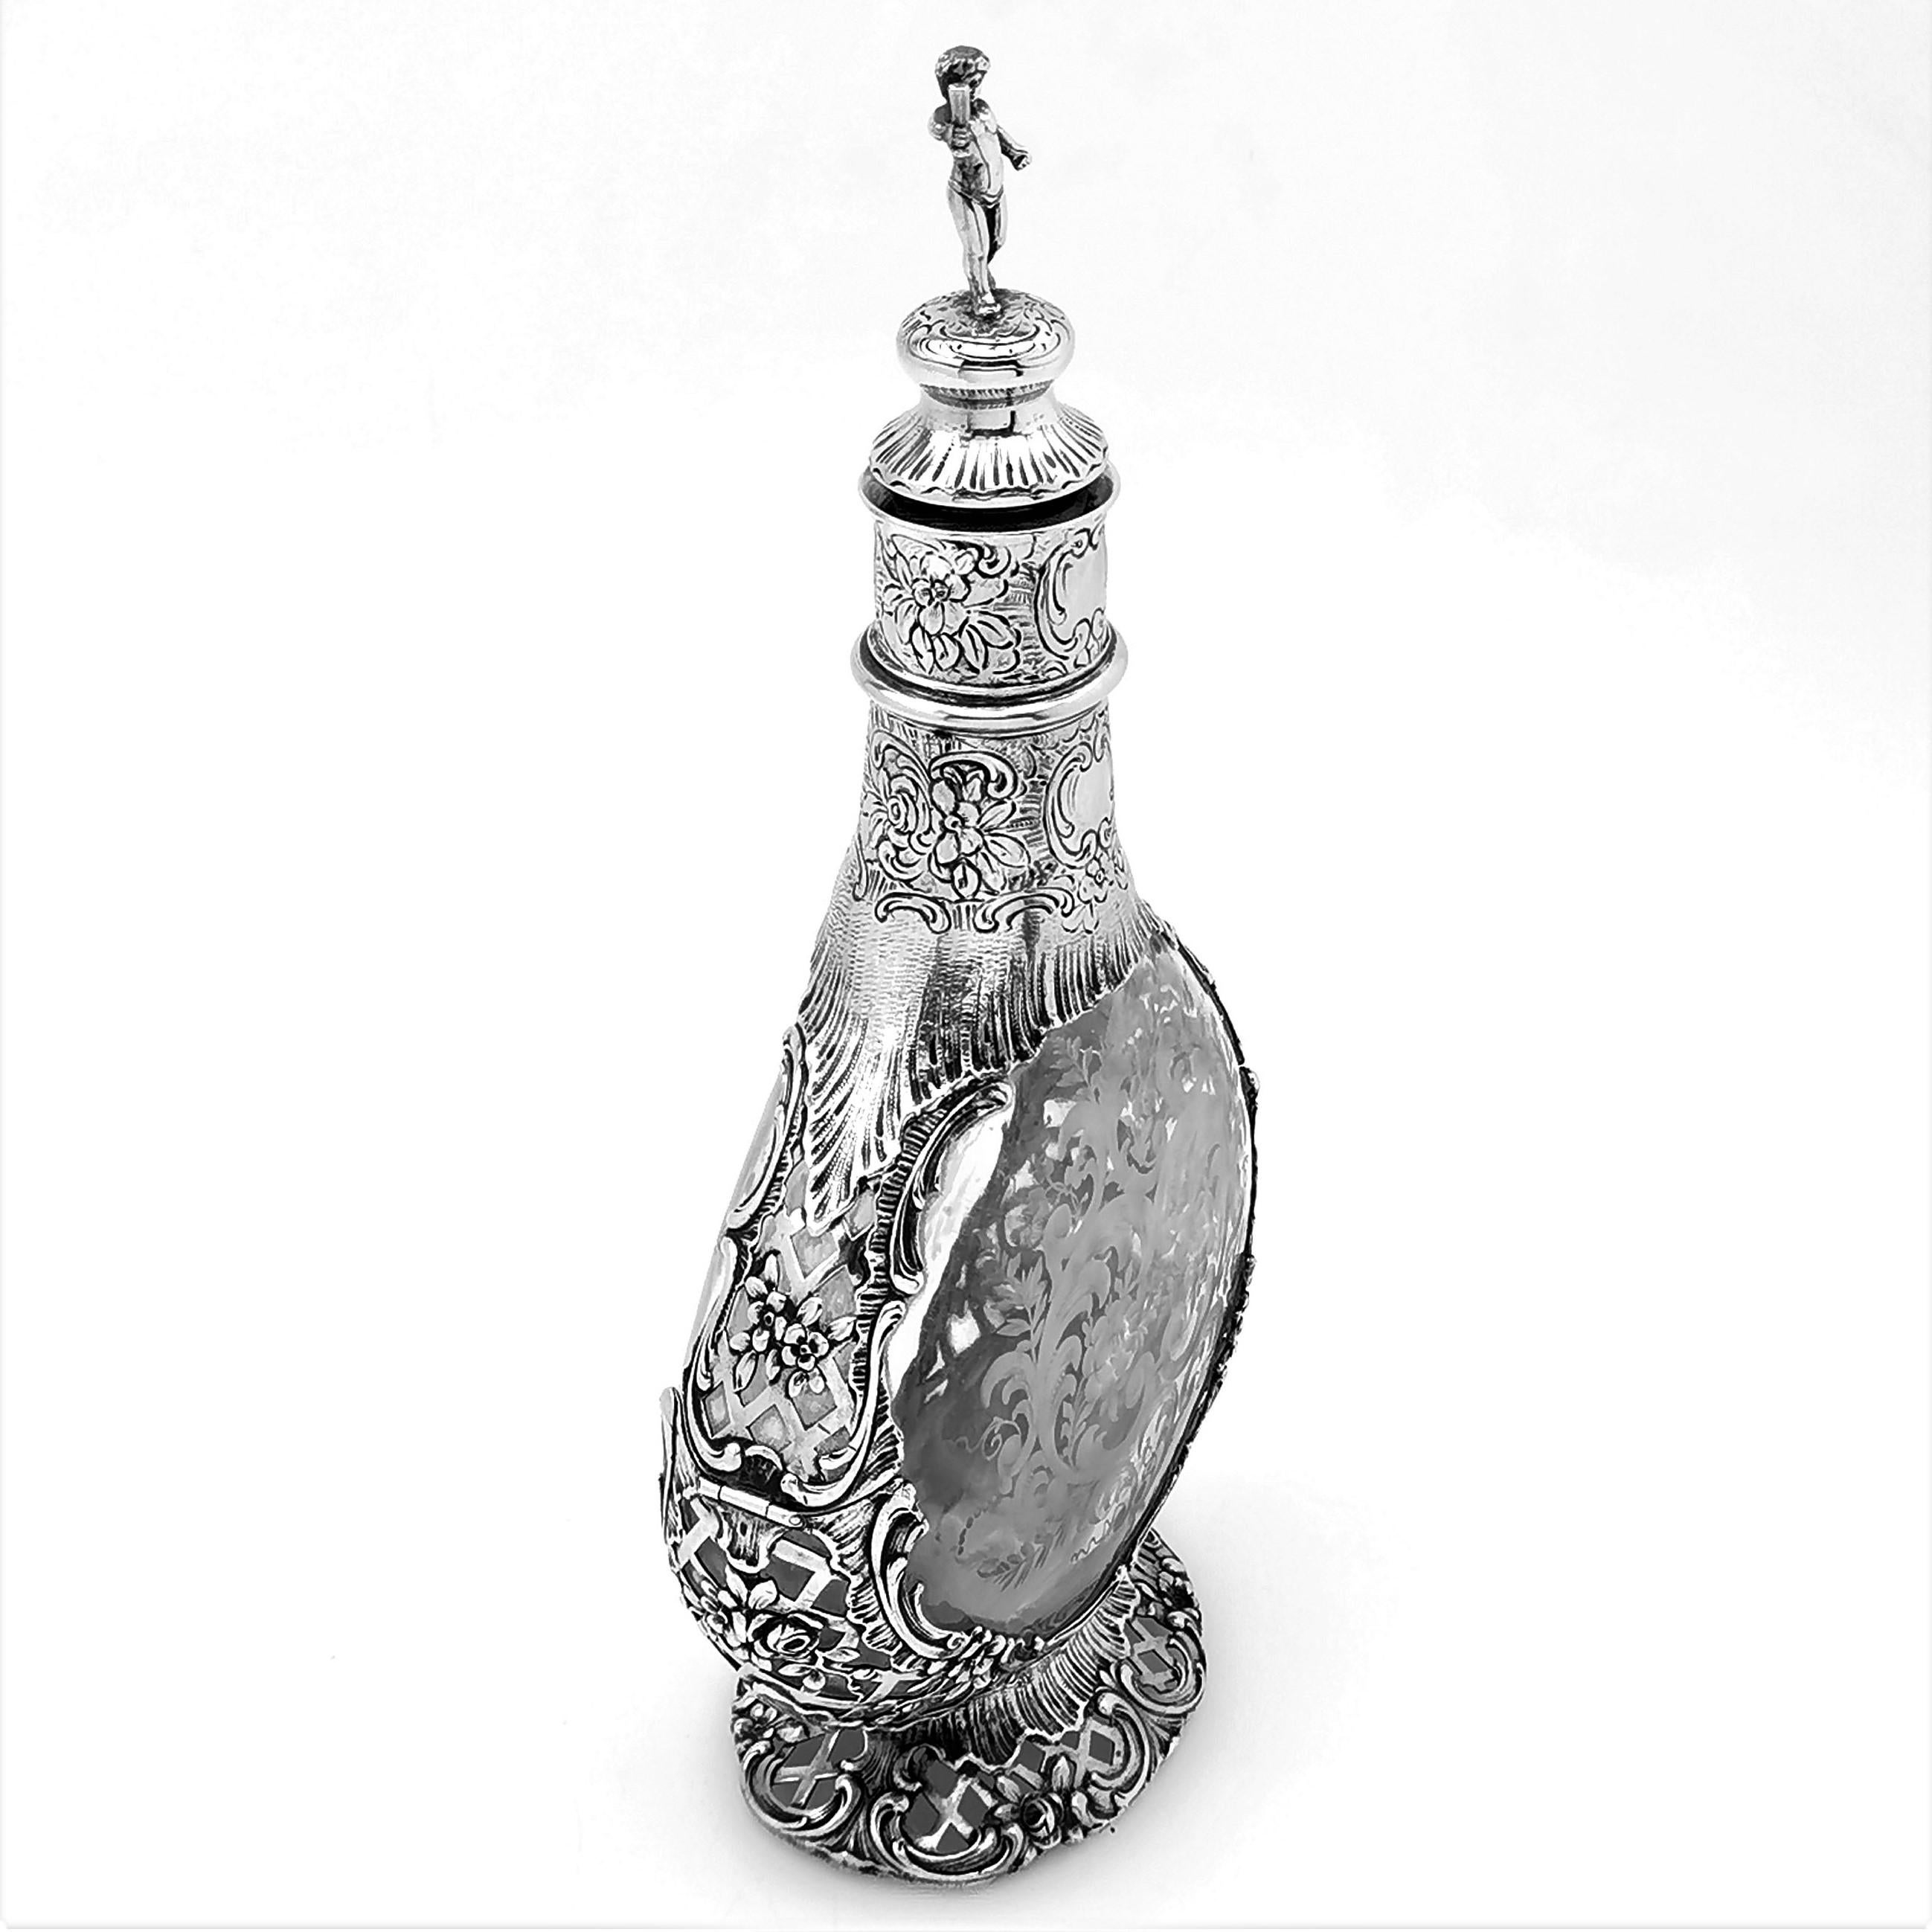 A beautiful antique German silver mounted decanter with an etched glass body. The Decanter has a beautiful chased and pieced Silver Mount with images of flowers and scrolls. The glass body has gorgeous floral and scroll etched patterning